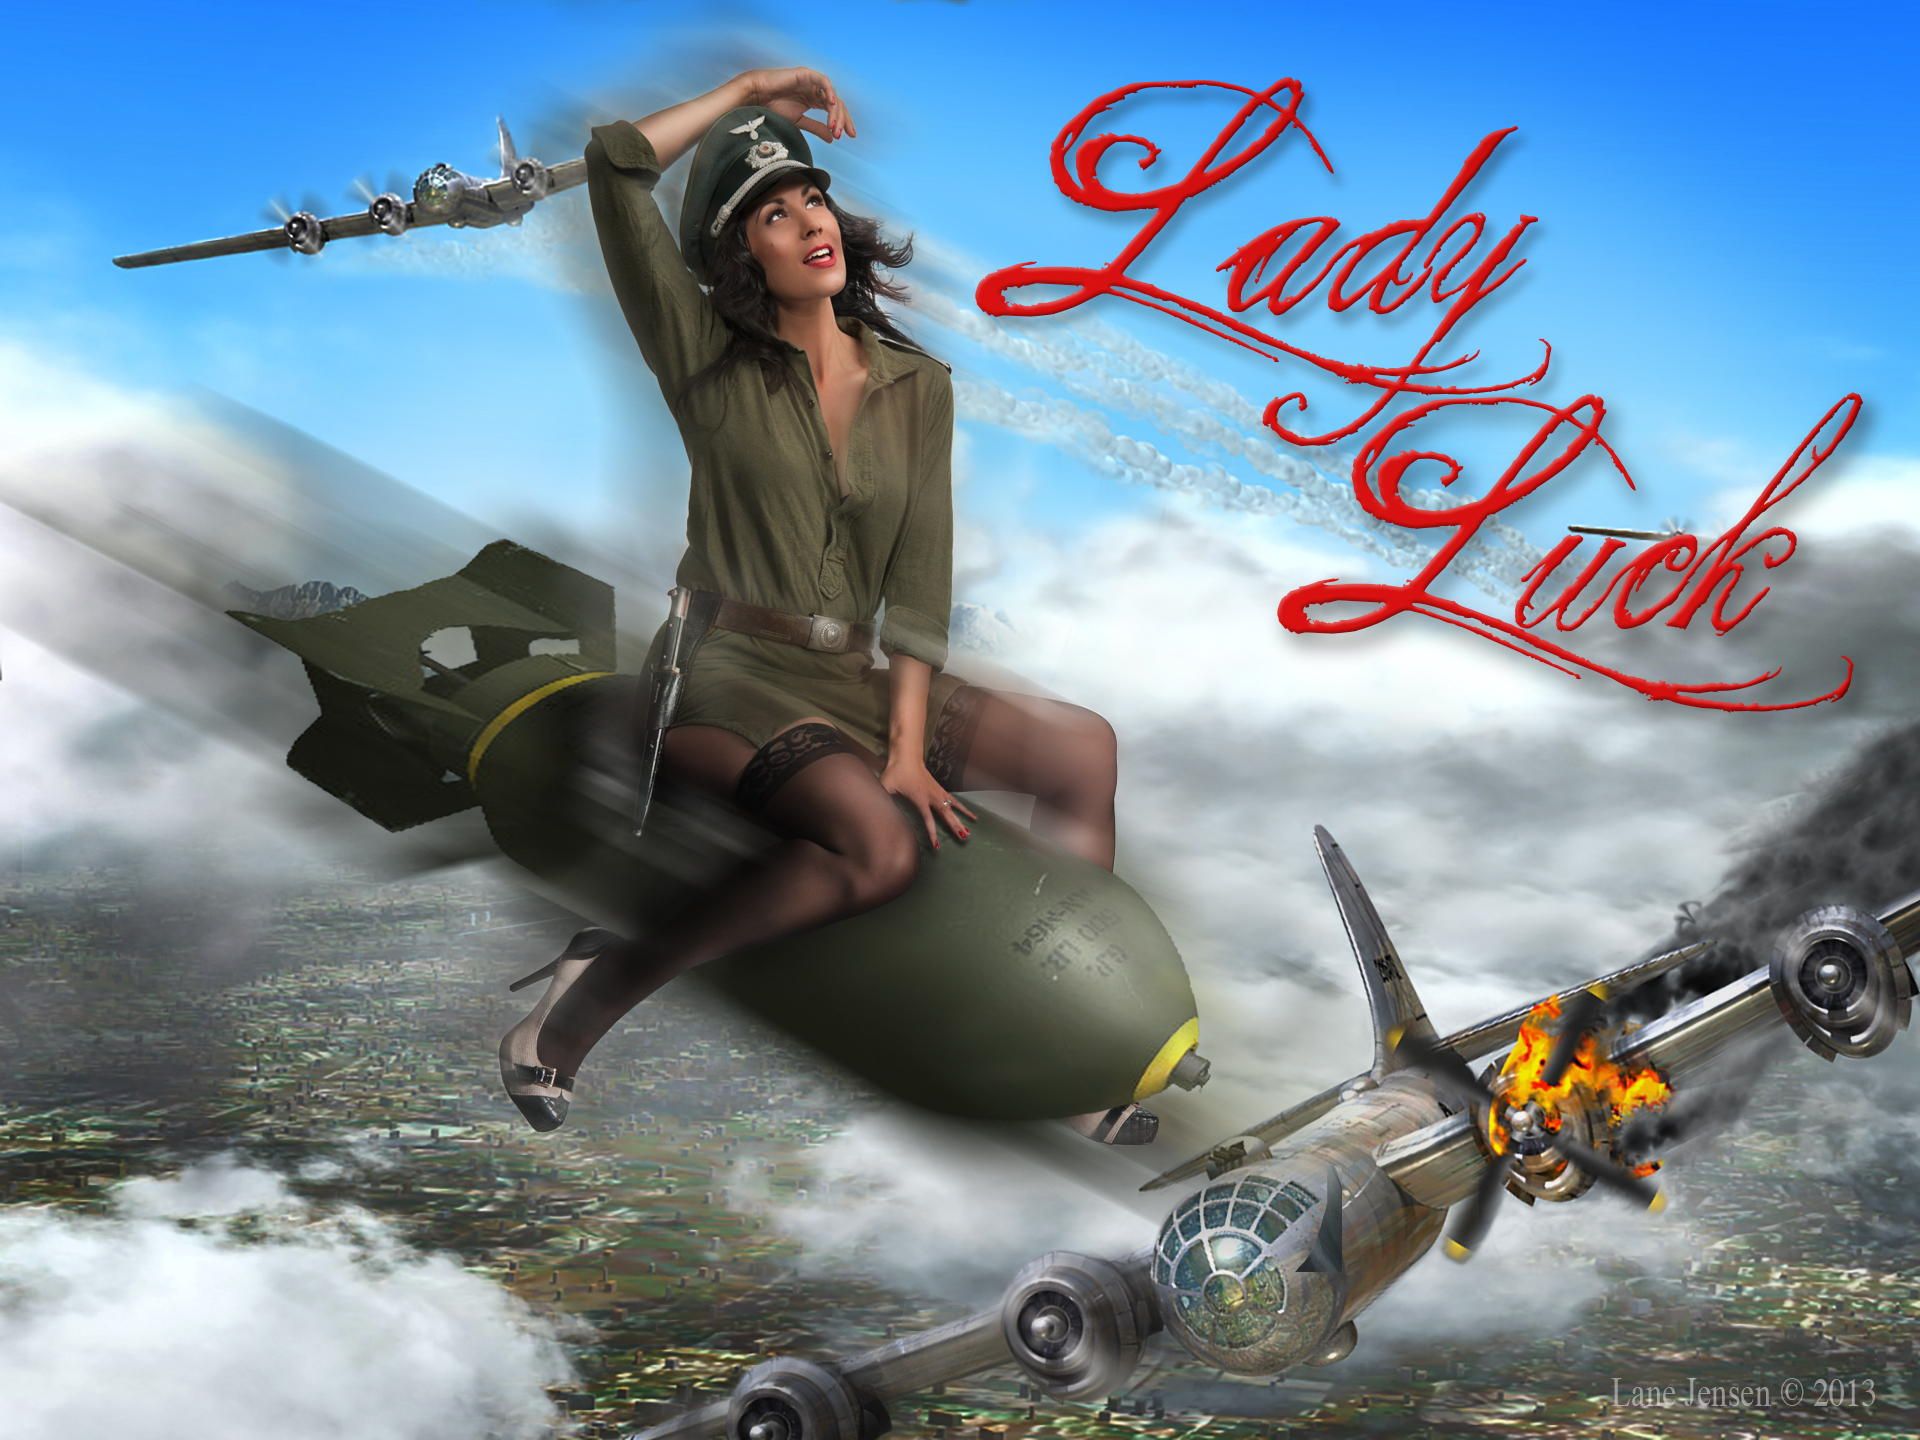 Photograph Lady Luck Pinup Bomb Girl By Lane Jensen - Pin Up Girl On A Bomb , HD Wallpaper & Backgrounds